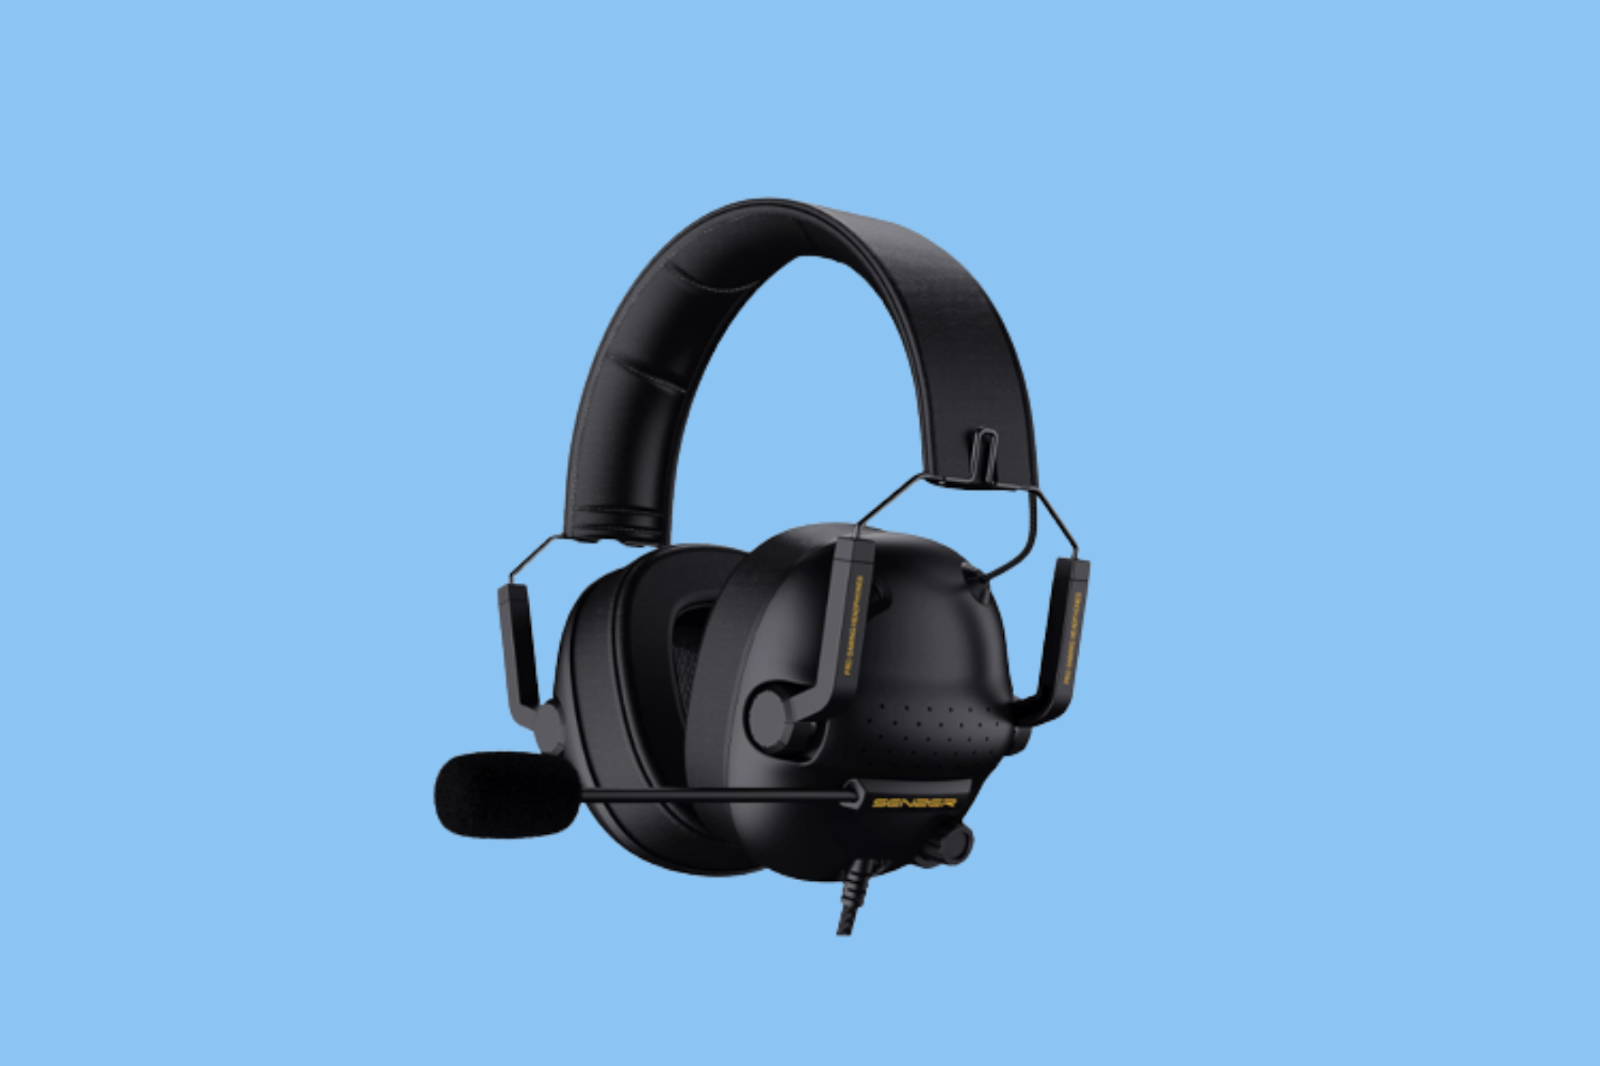 Noise Cancelling Microphone for your gamer friends